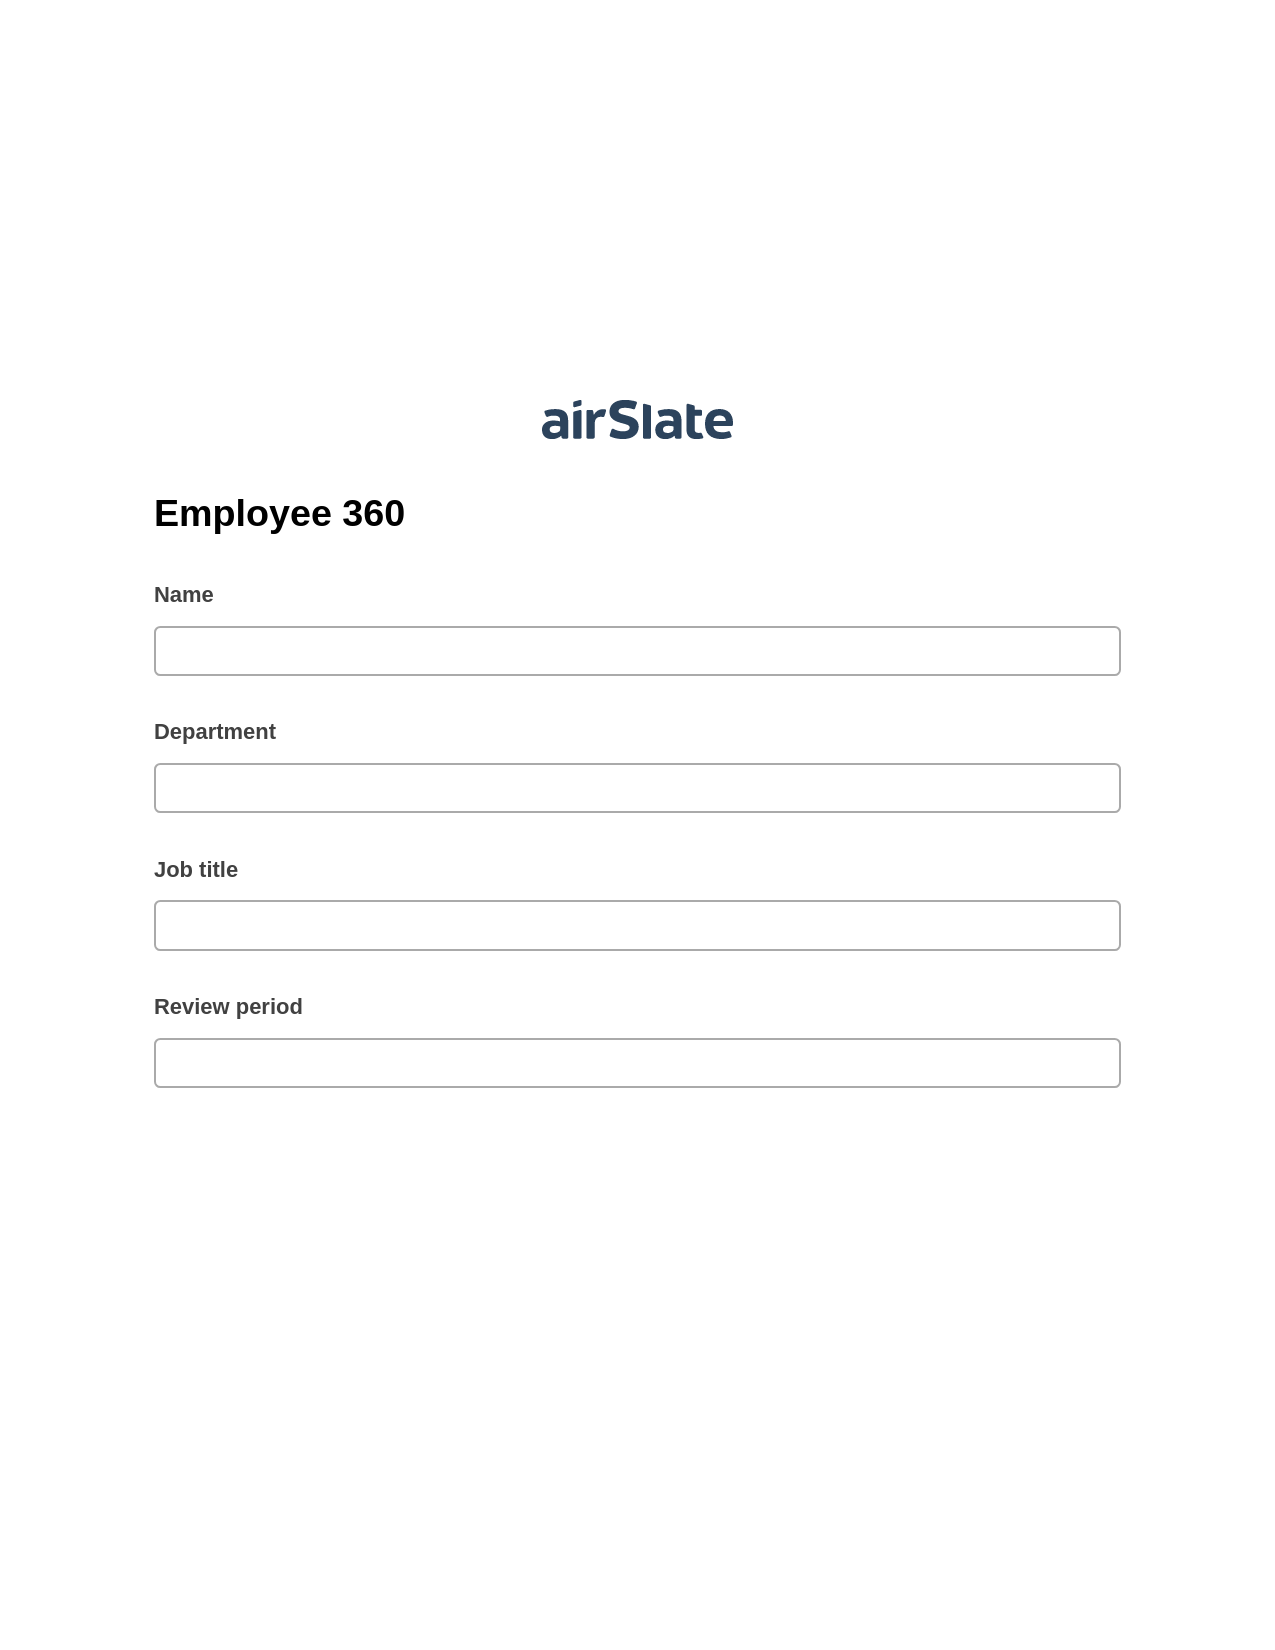 Employee 360 Pre-fill Dropdowns from Airtable, Export to MS Dynamics 365 Bot, Export to Excel 365 Bot